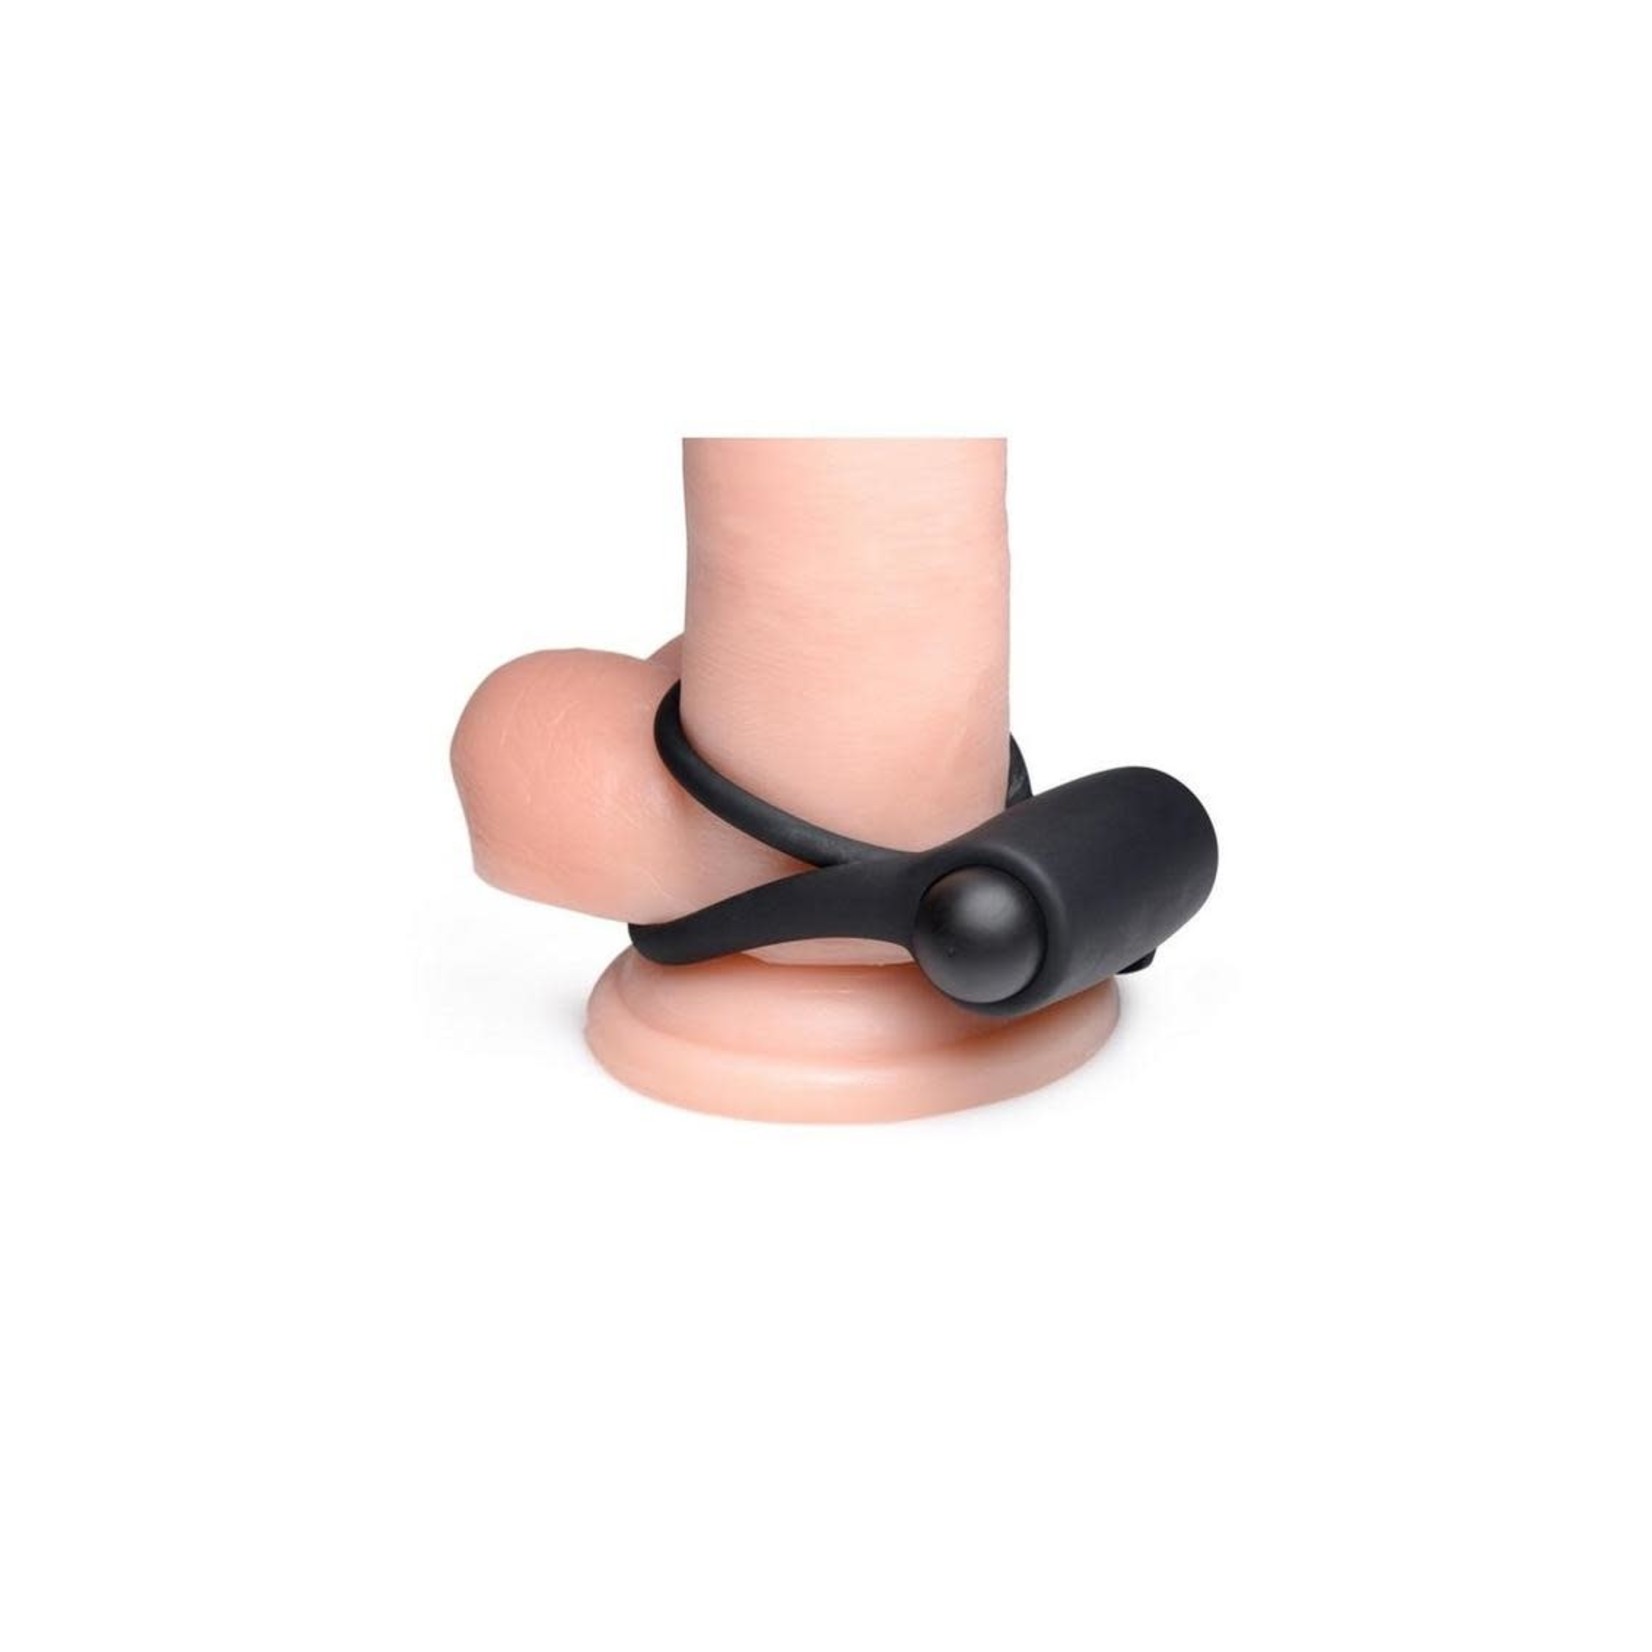 Bang! Silicone Rechargeable Cock Ring And Bullet With Remote Control - Black